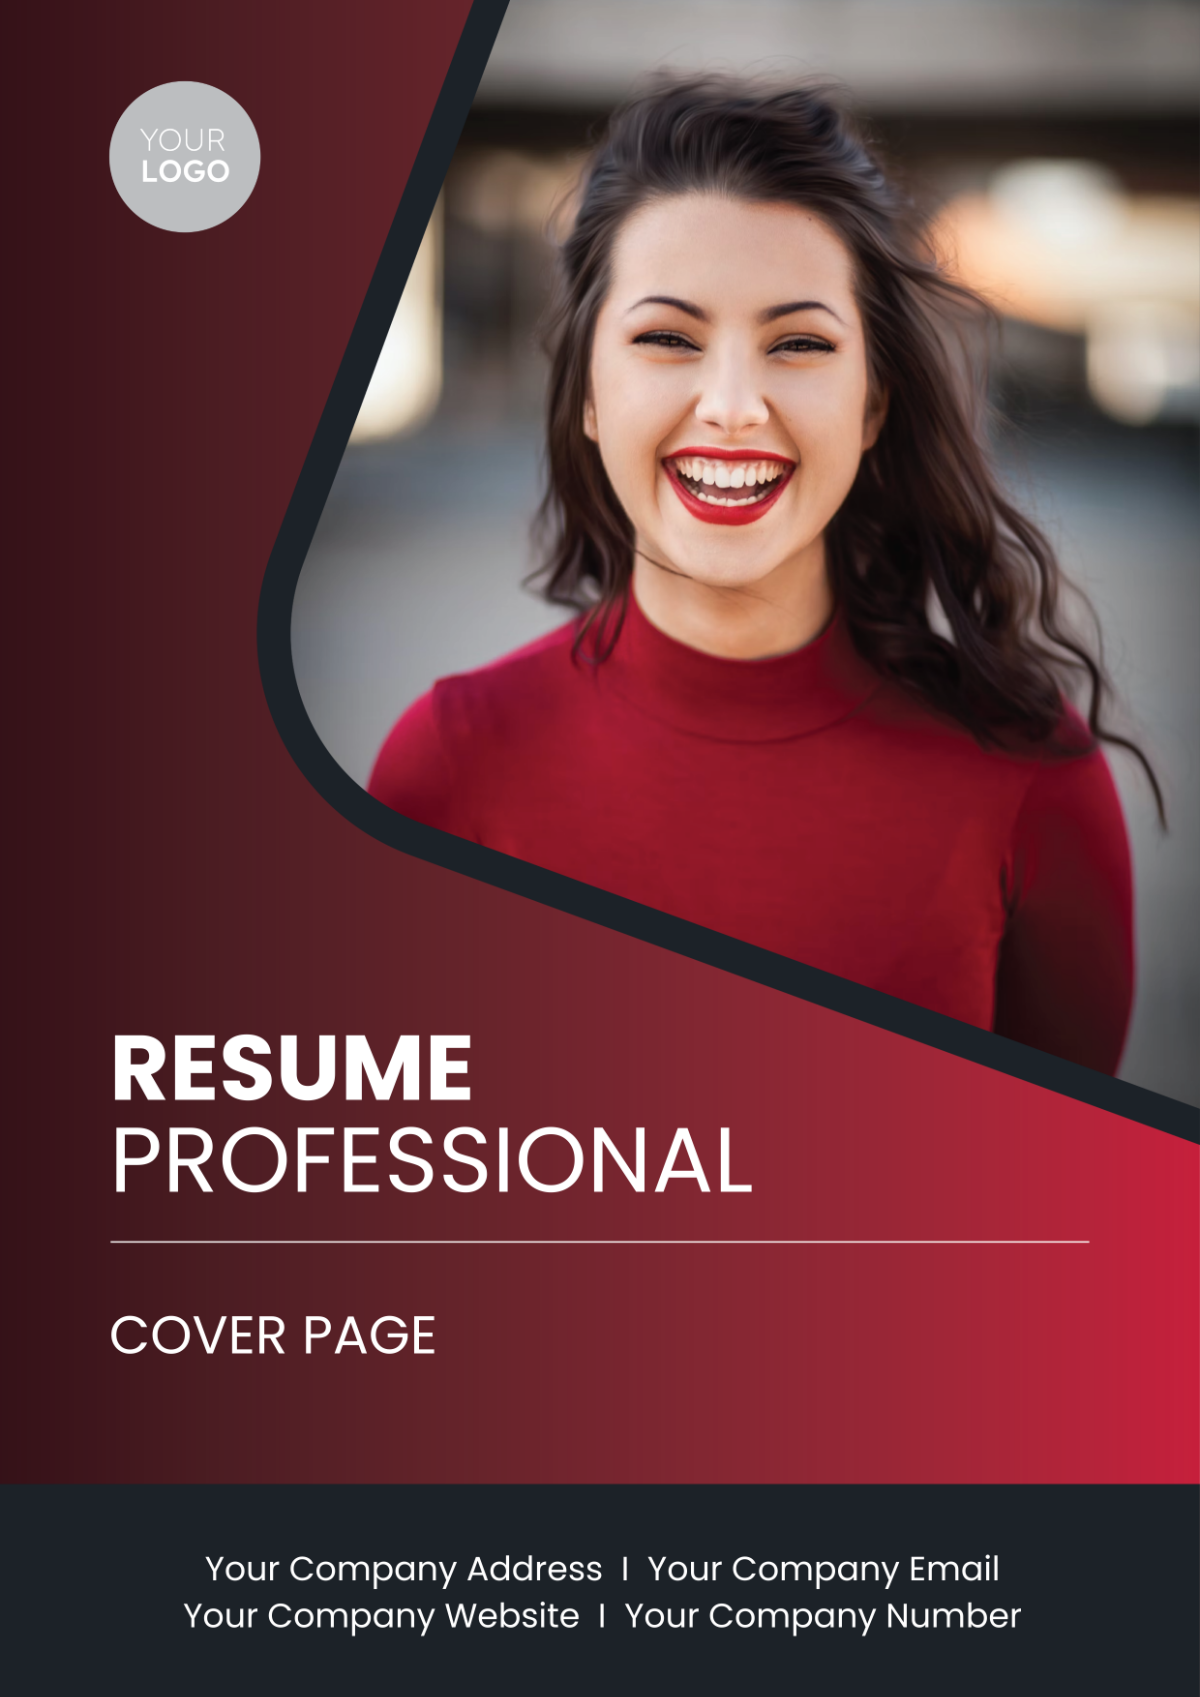 Resume Professional Cover Page